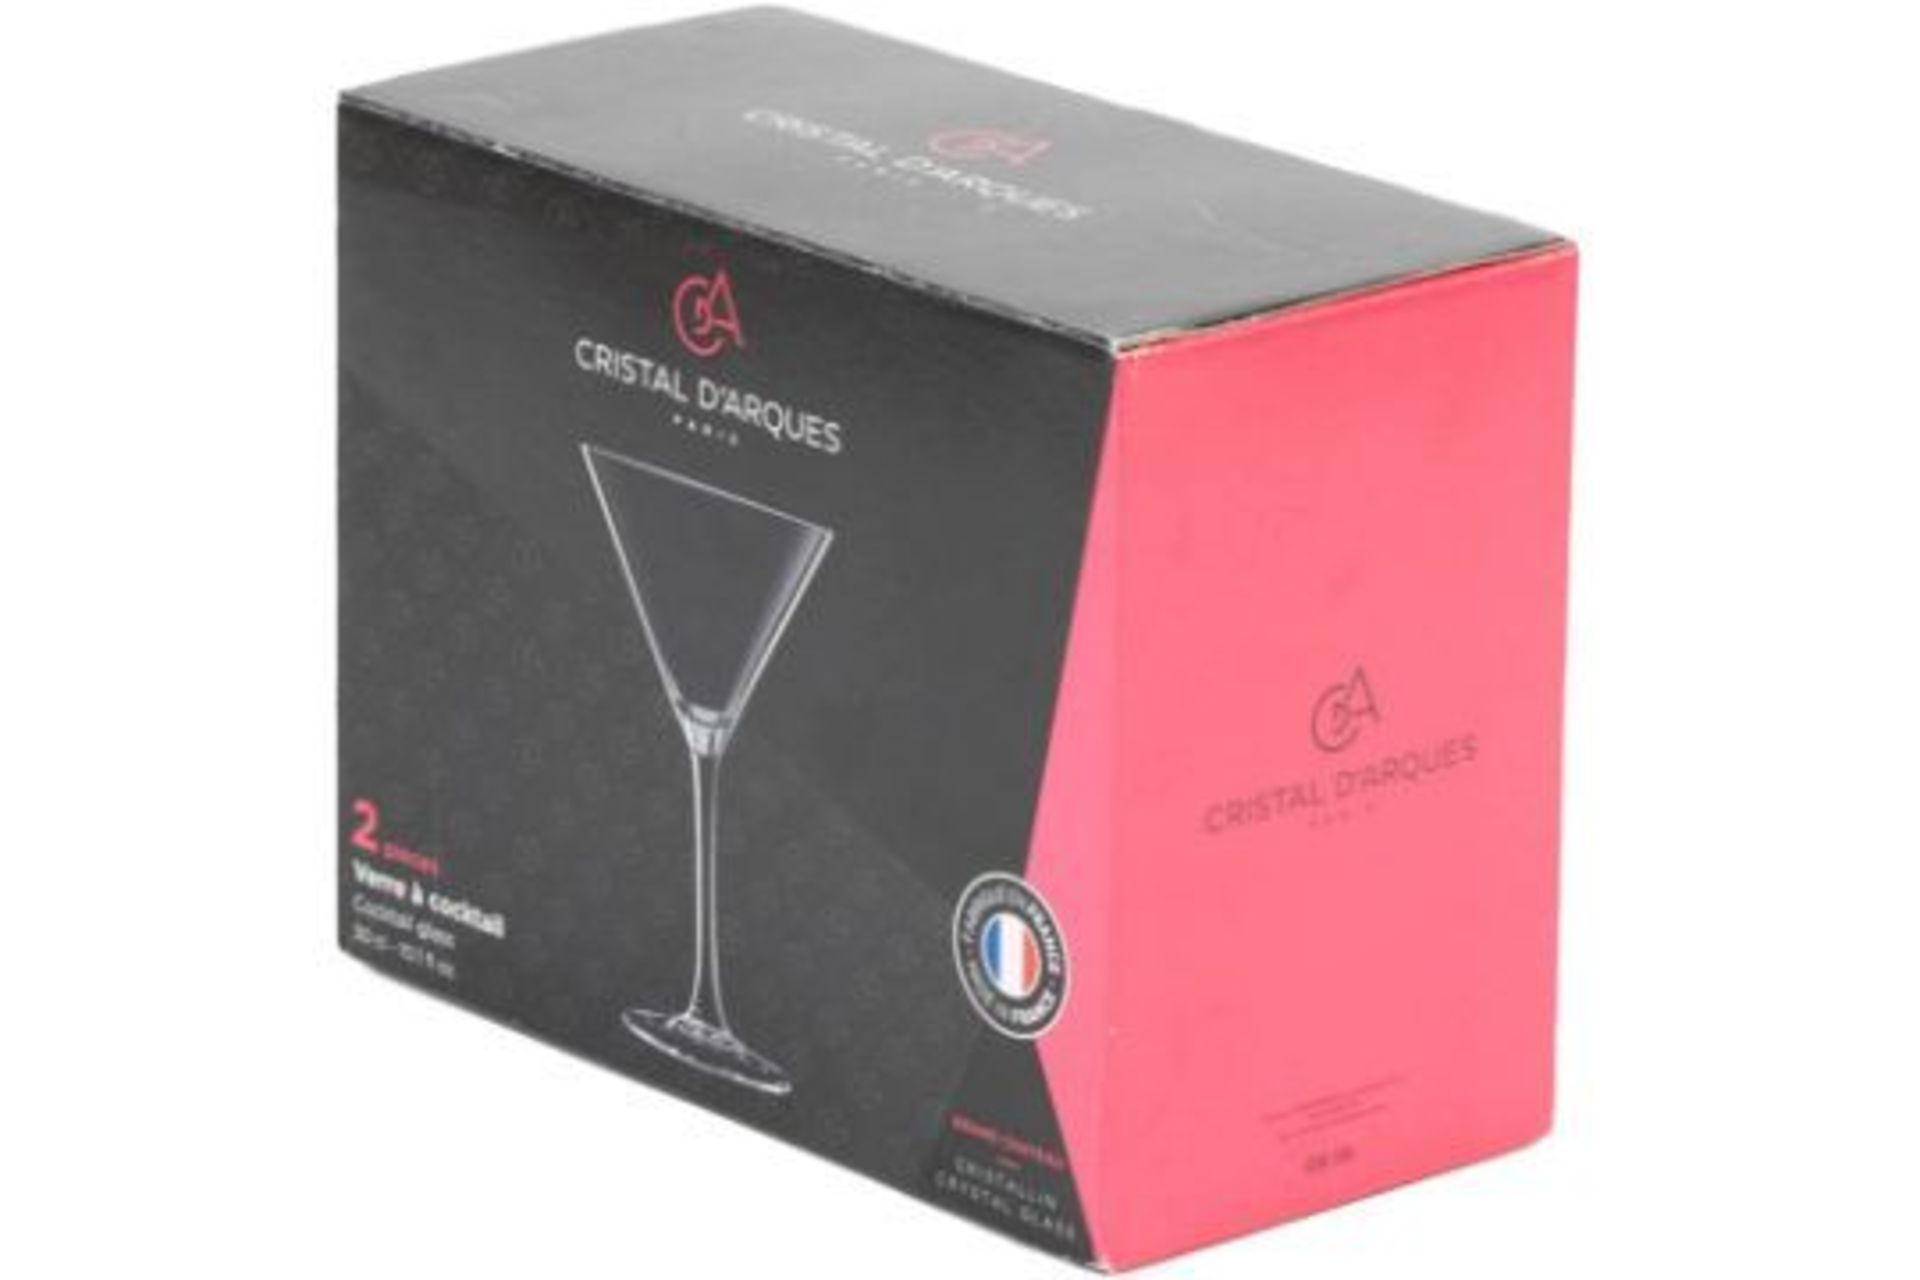 x2 New Crystal D'arques 300ml Cocktail Glasses - Image 2 of 2